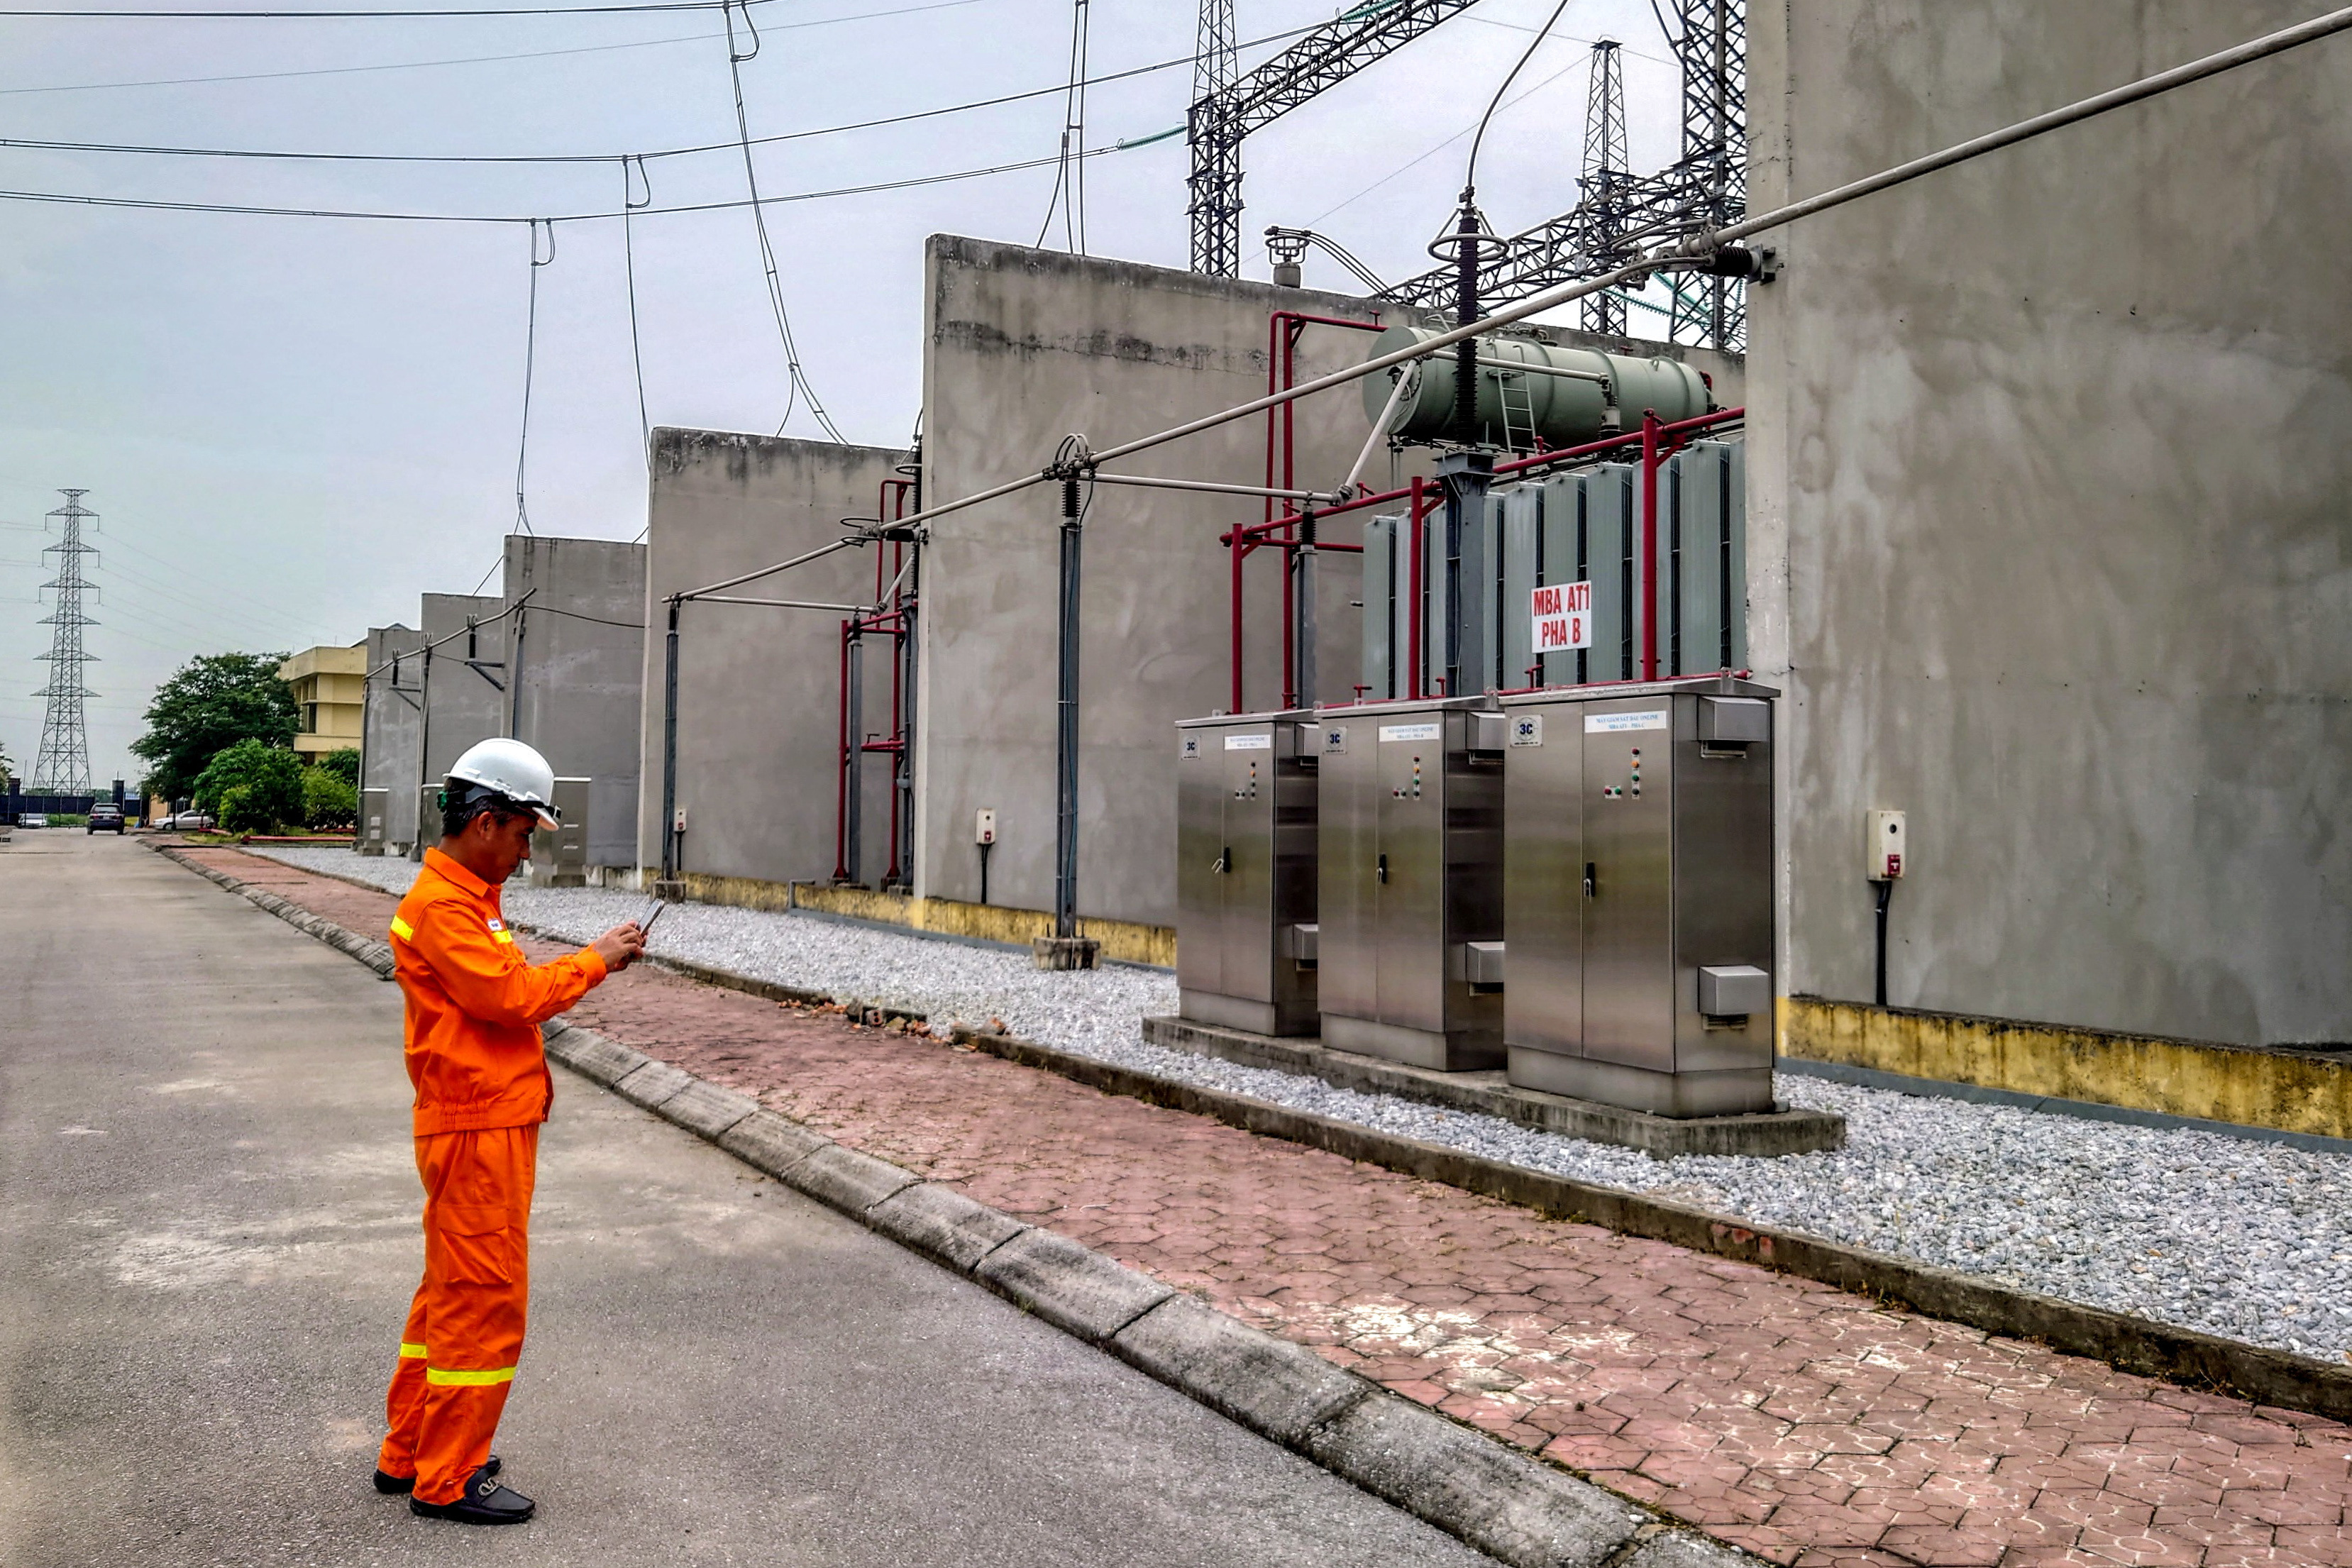 Pham Van Coung, a director of Pho Noi Power Station, works at the Pho Noi Power Station, a state utility owned by Electricity of Vietnam, in Hung Yen province